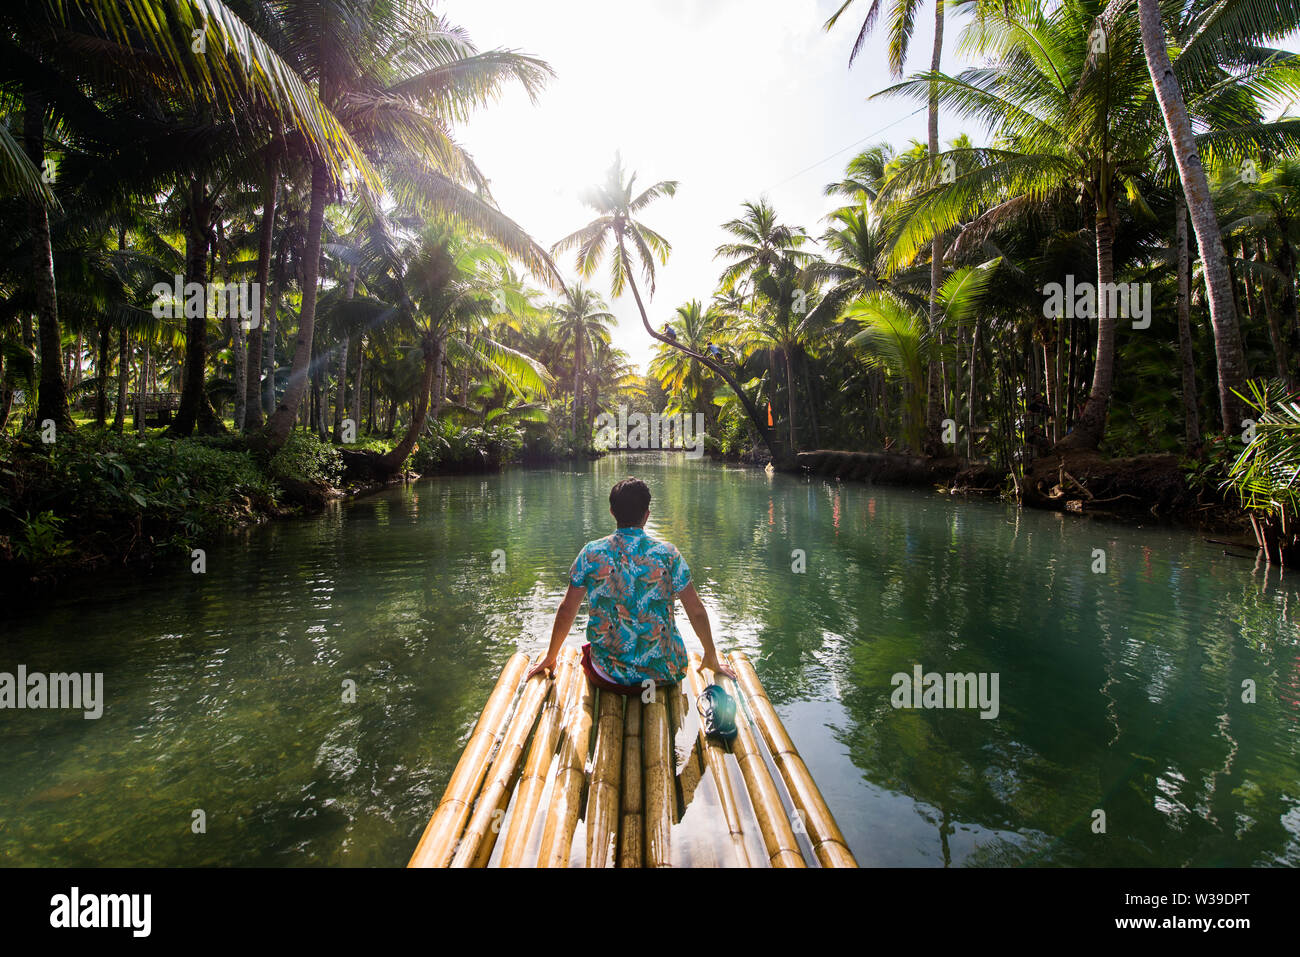 Famous instagrammed leaning palm tree at Maasin River in Siargao, Philippines - People having fun swinging on a coconut tree in the jungle Stock Photo